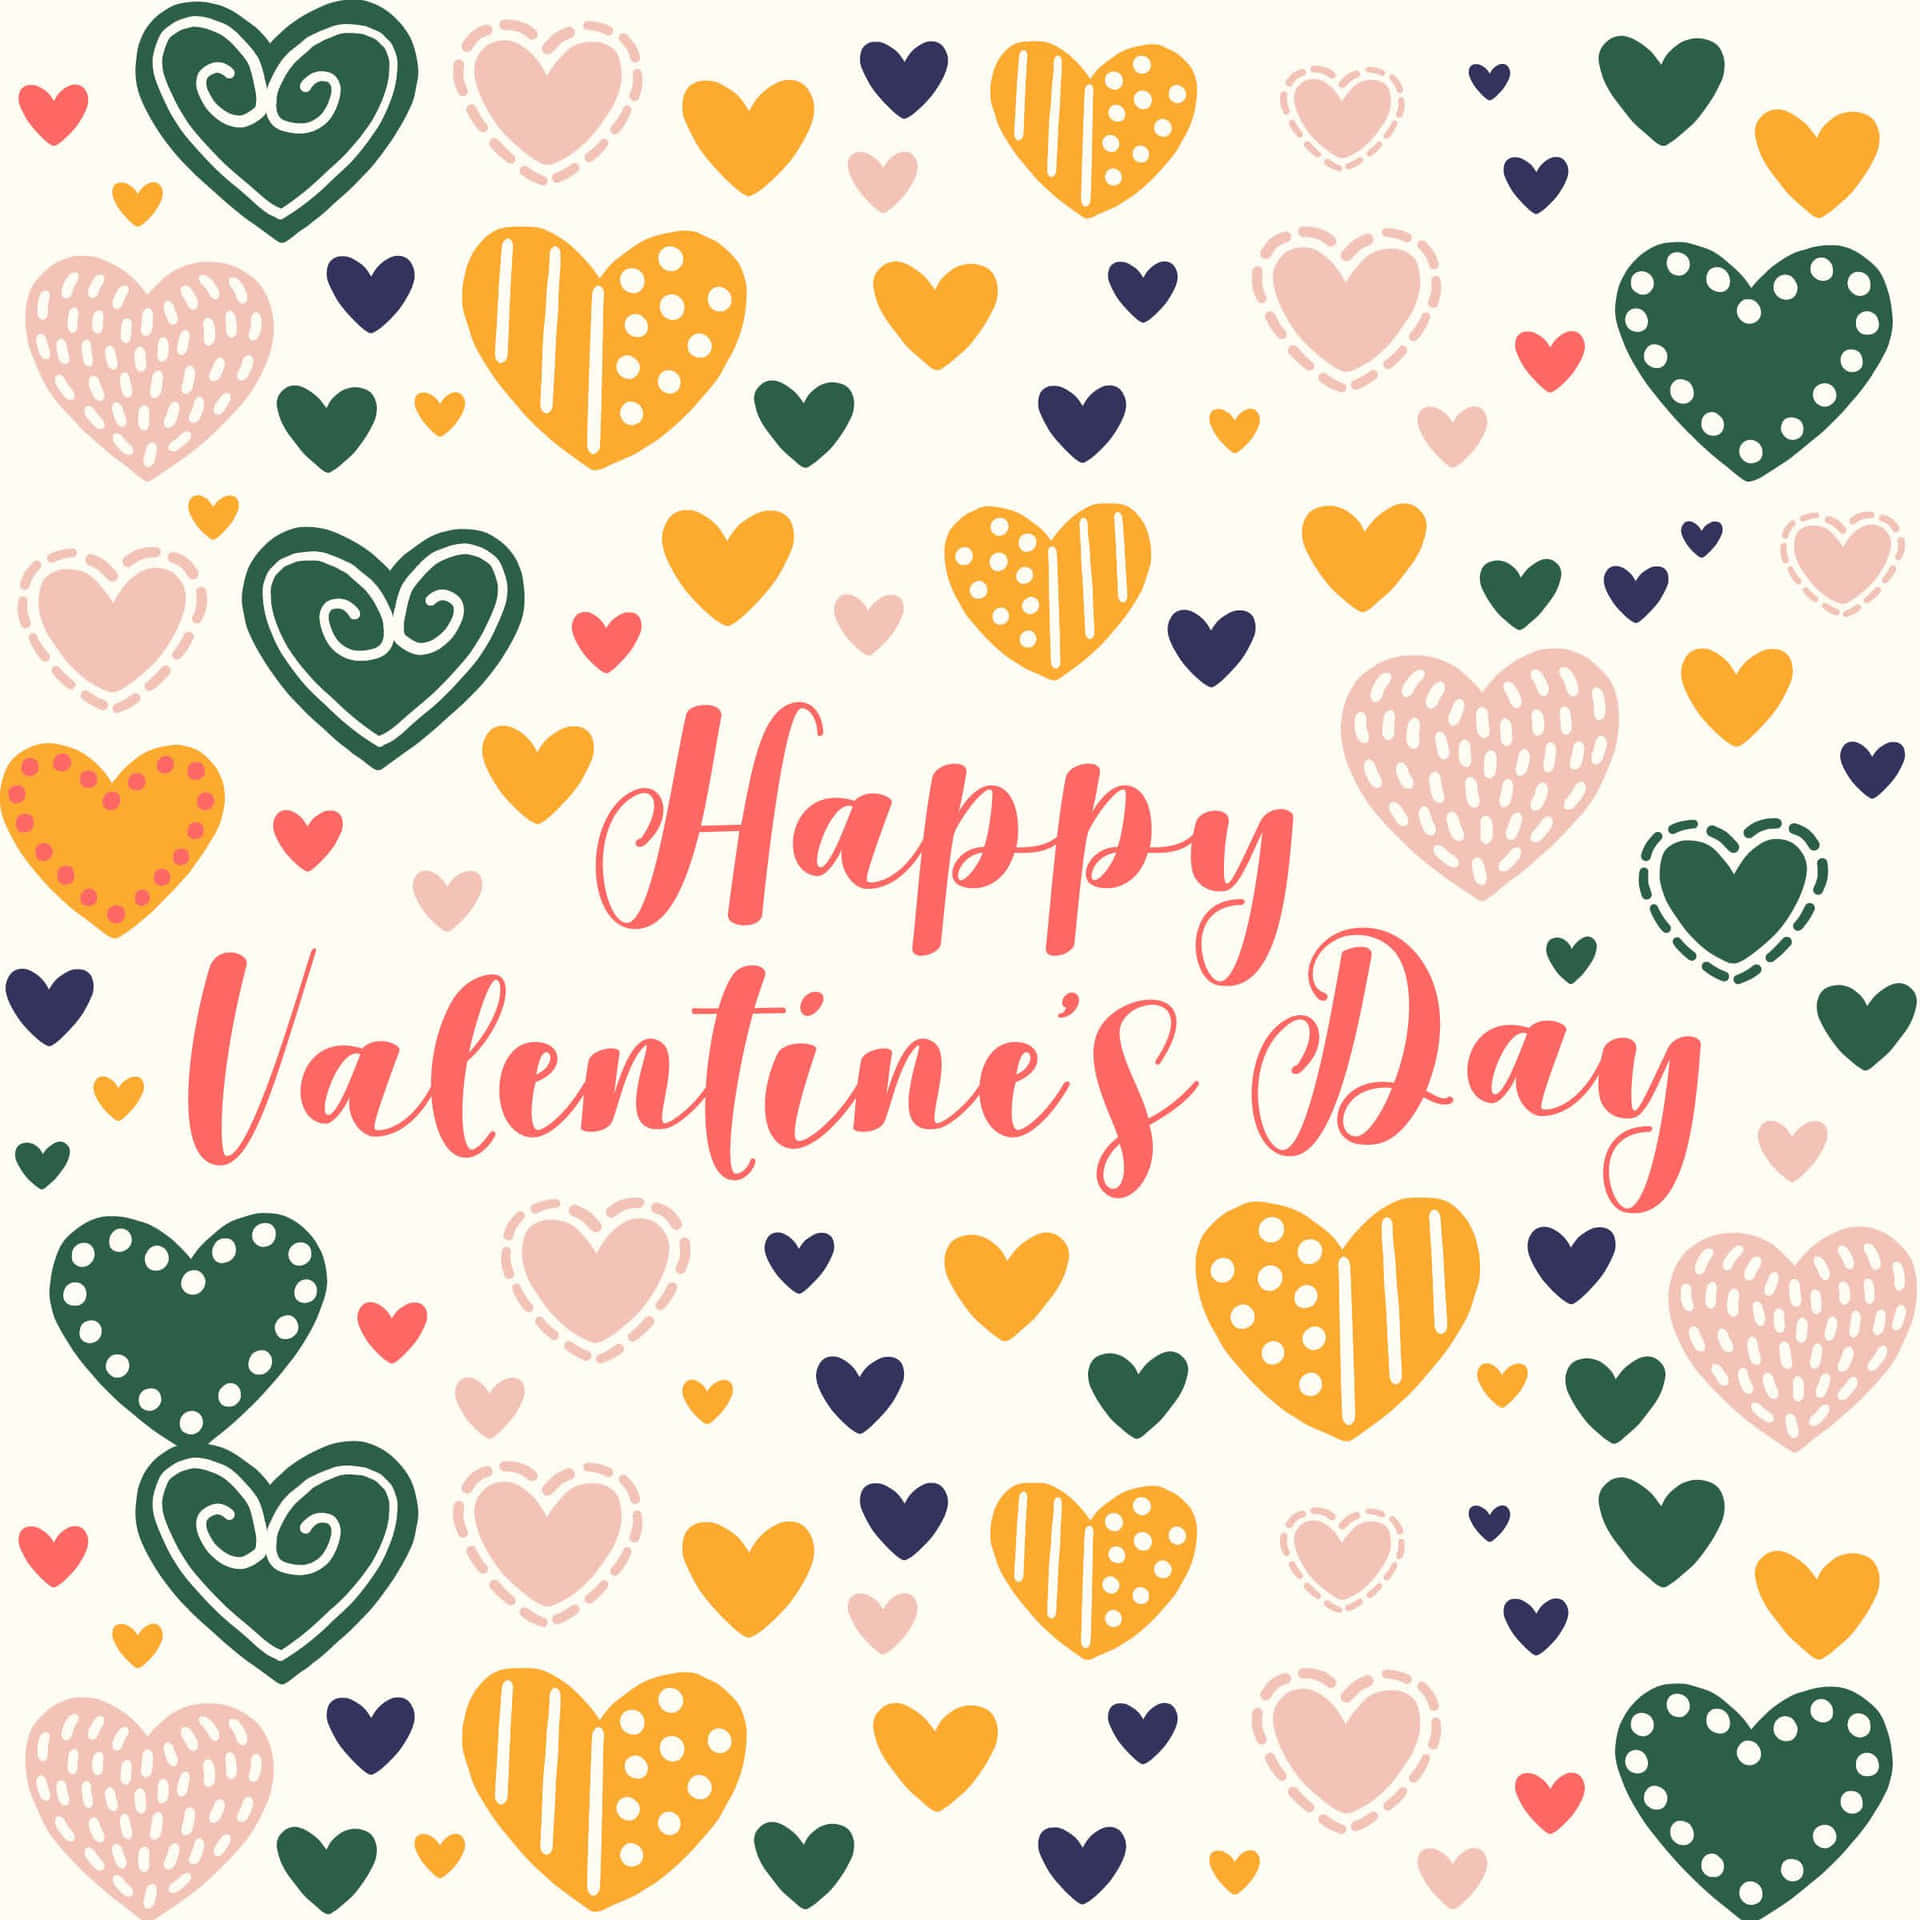 Cute Valentines Happy Valentine's Day Greeting Colorful Hearts Picture